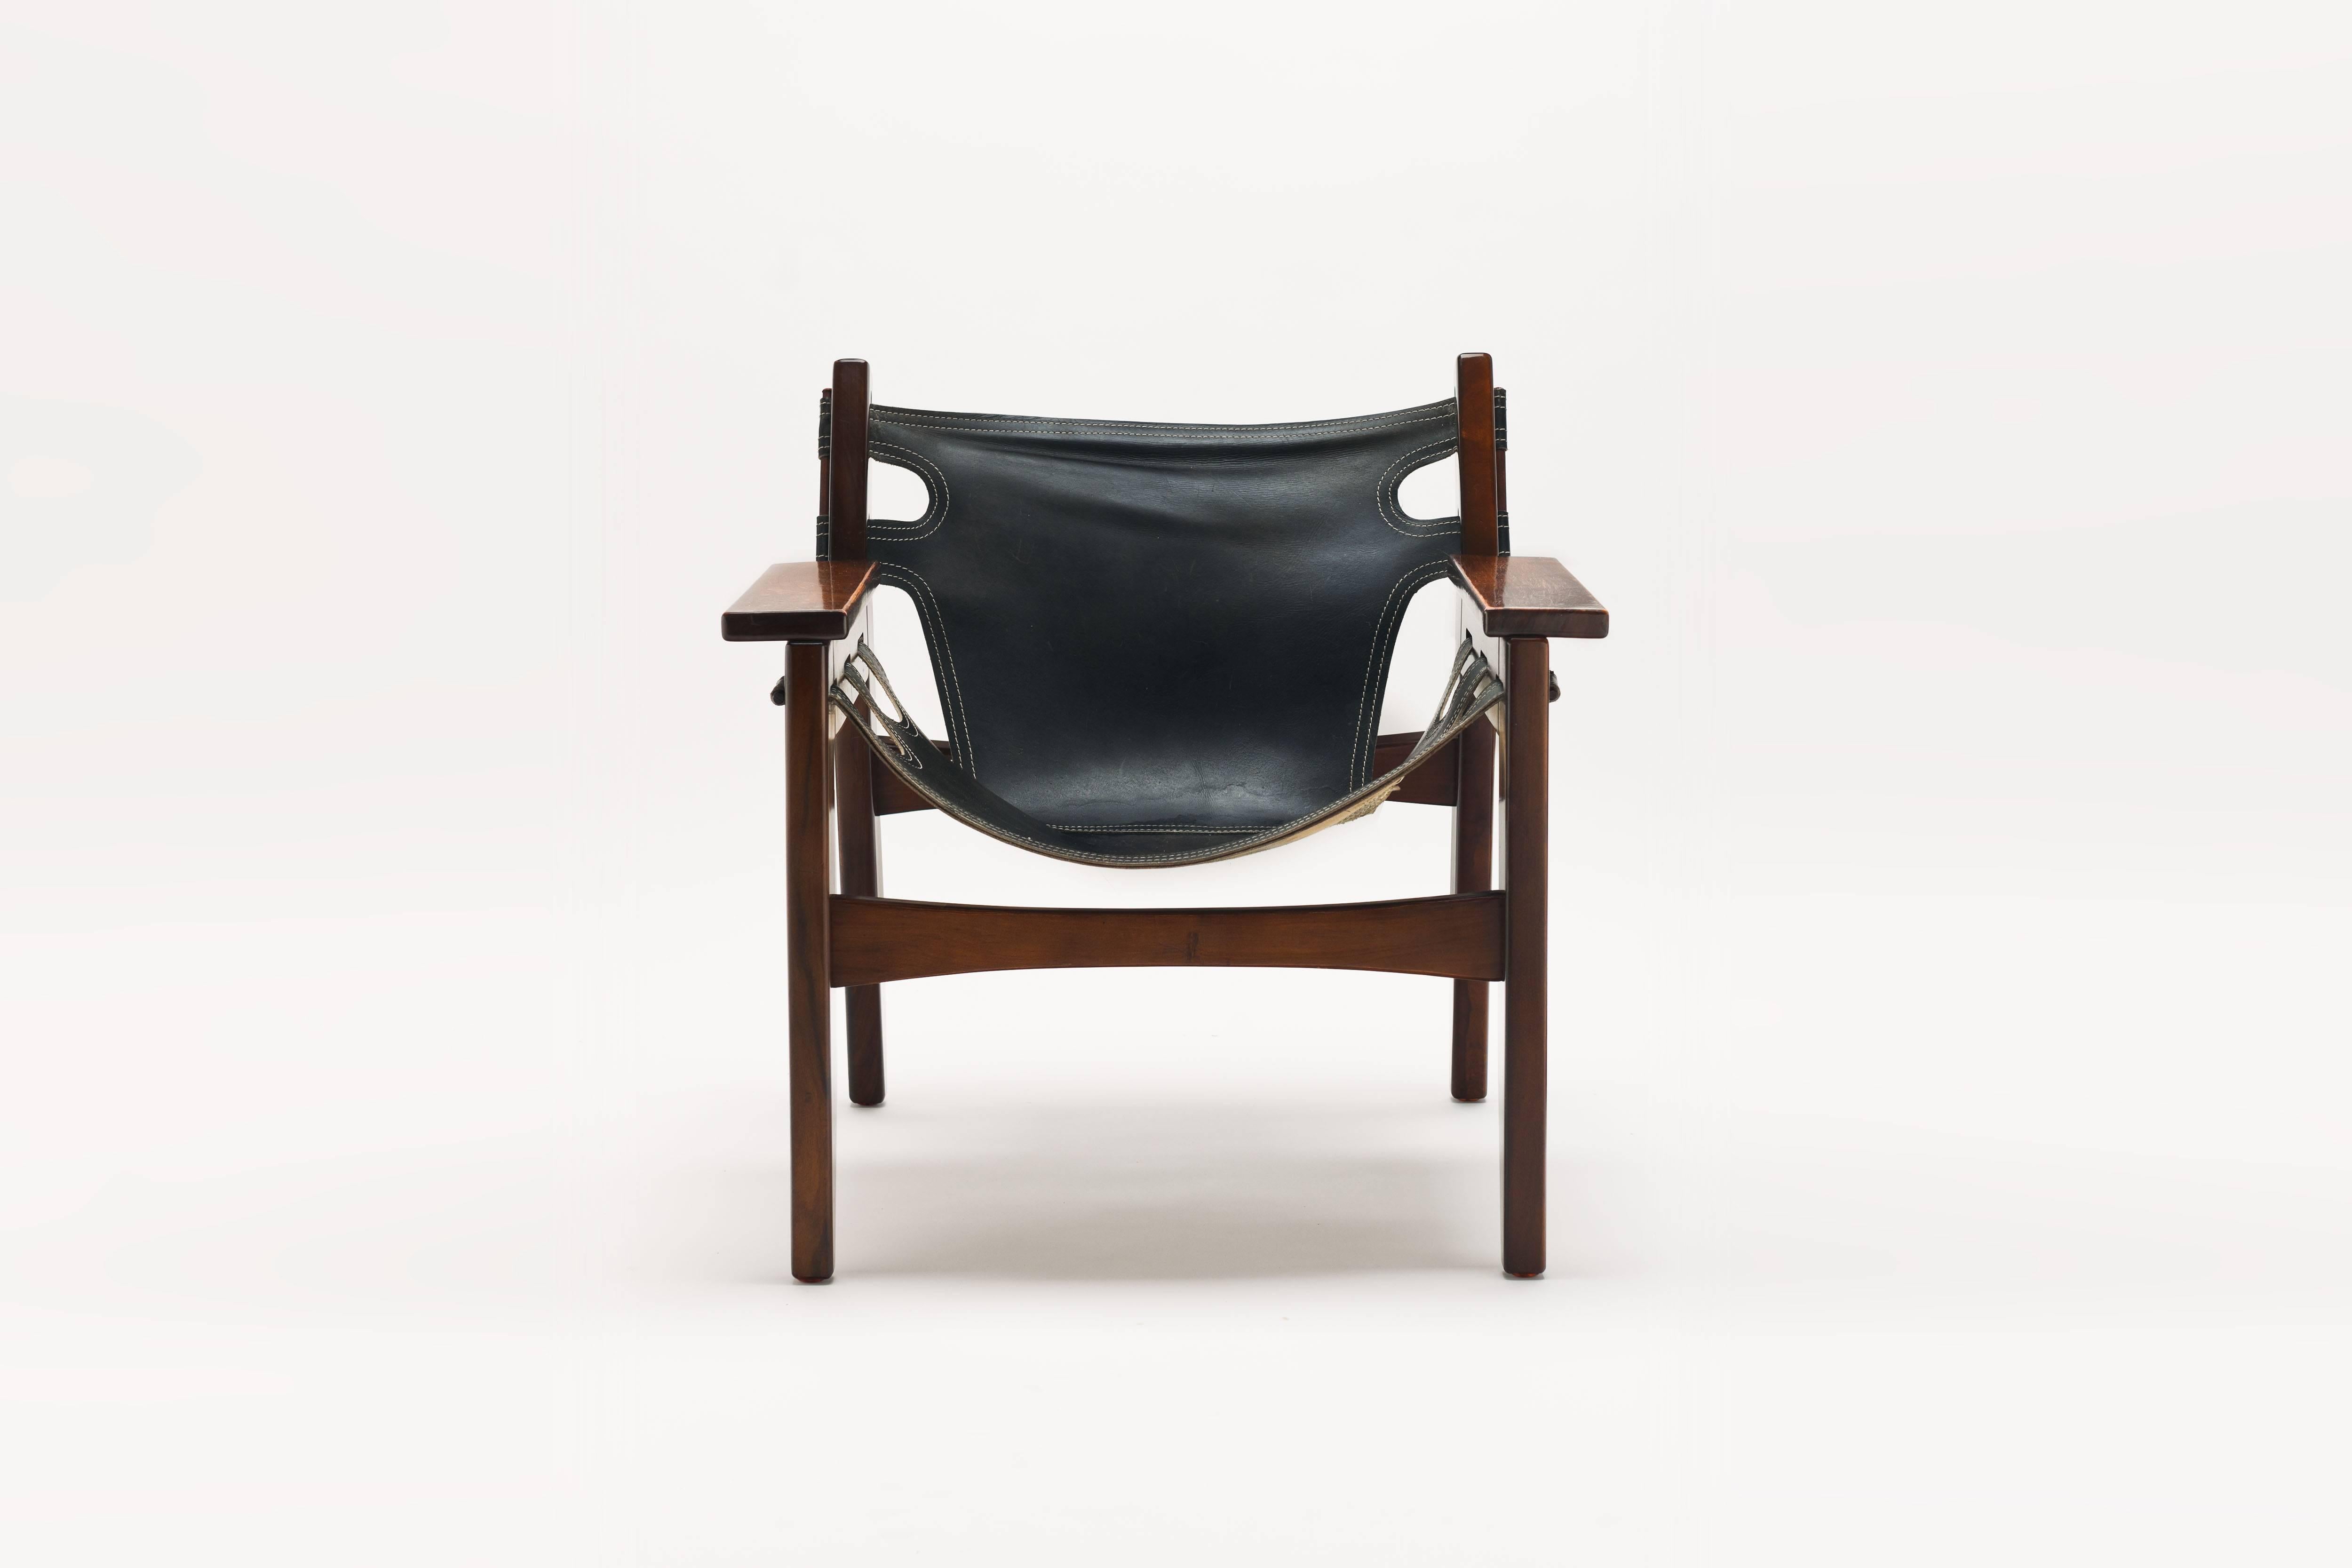 Imbuia wooden (a type of tropical walnut timber) and black leather 